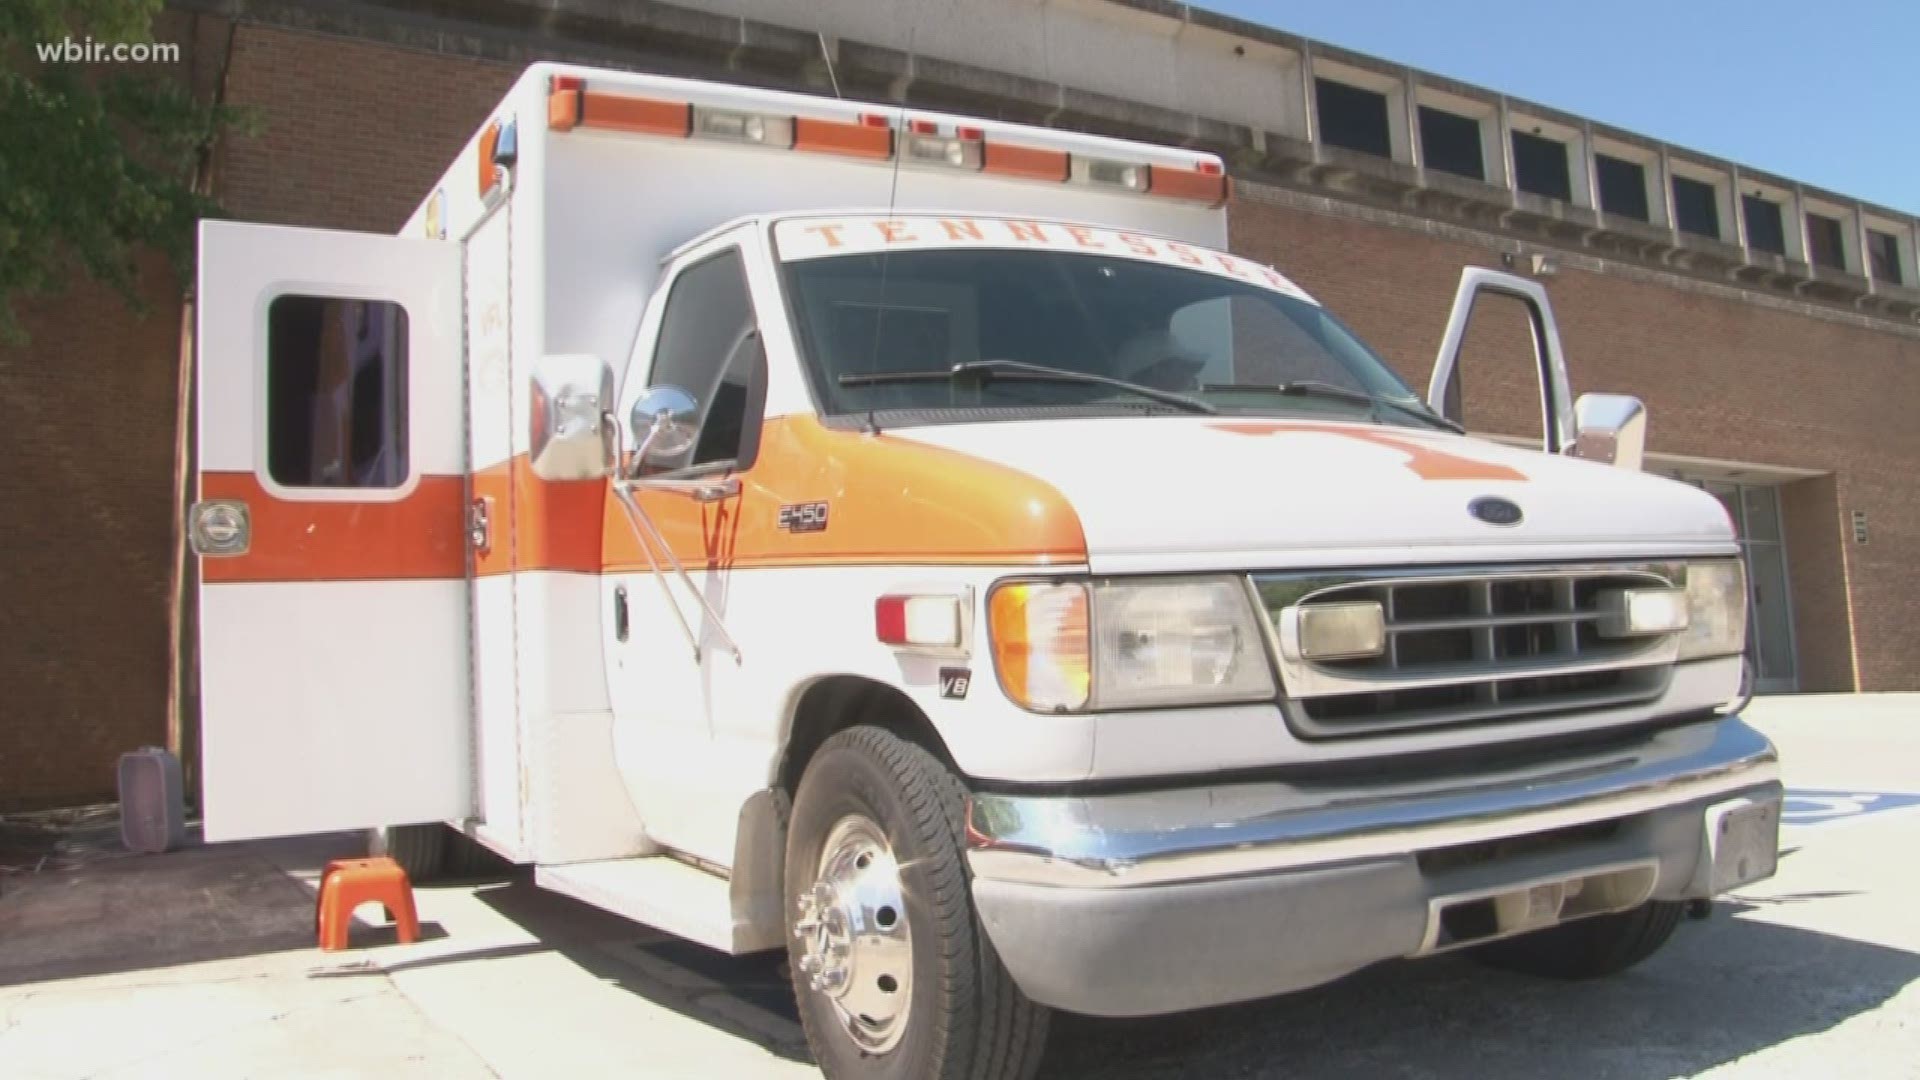 It took the Edwards family about four summers to completely re-do the old ambulance.